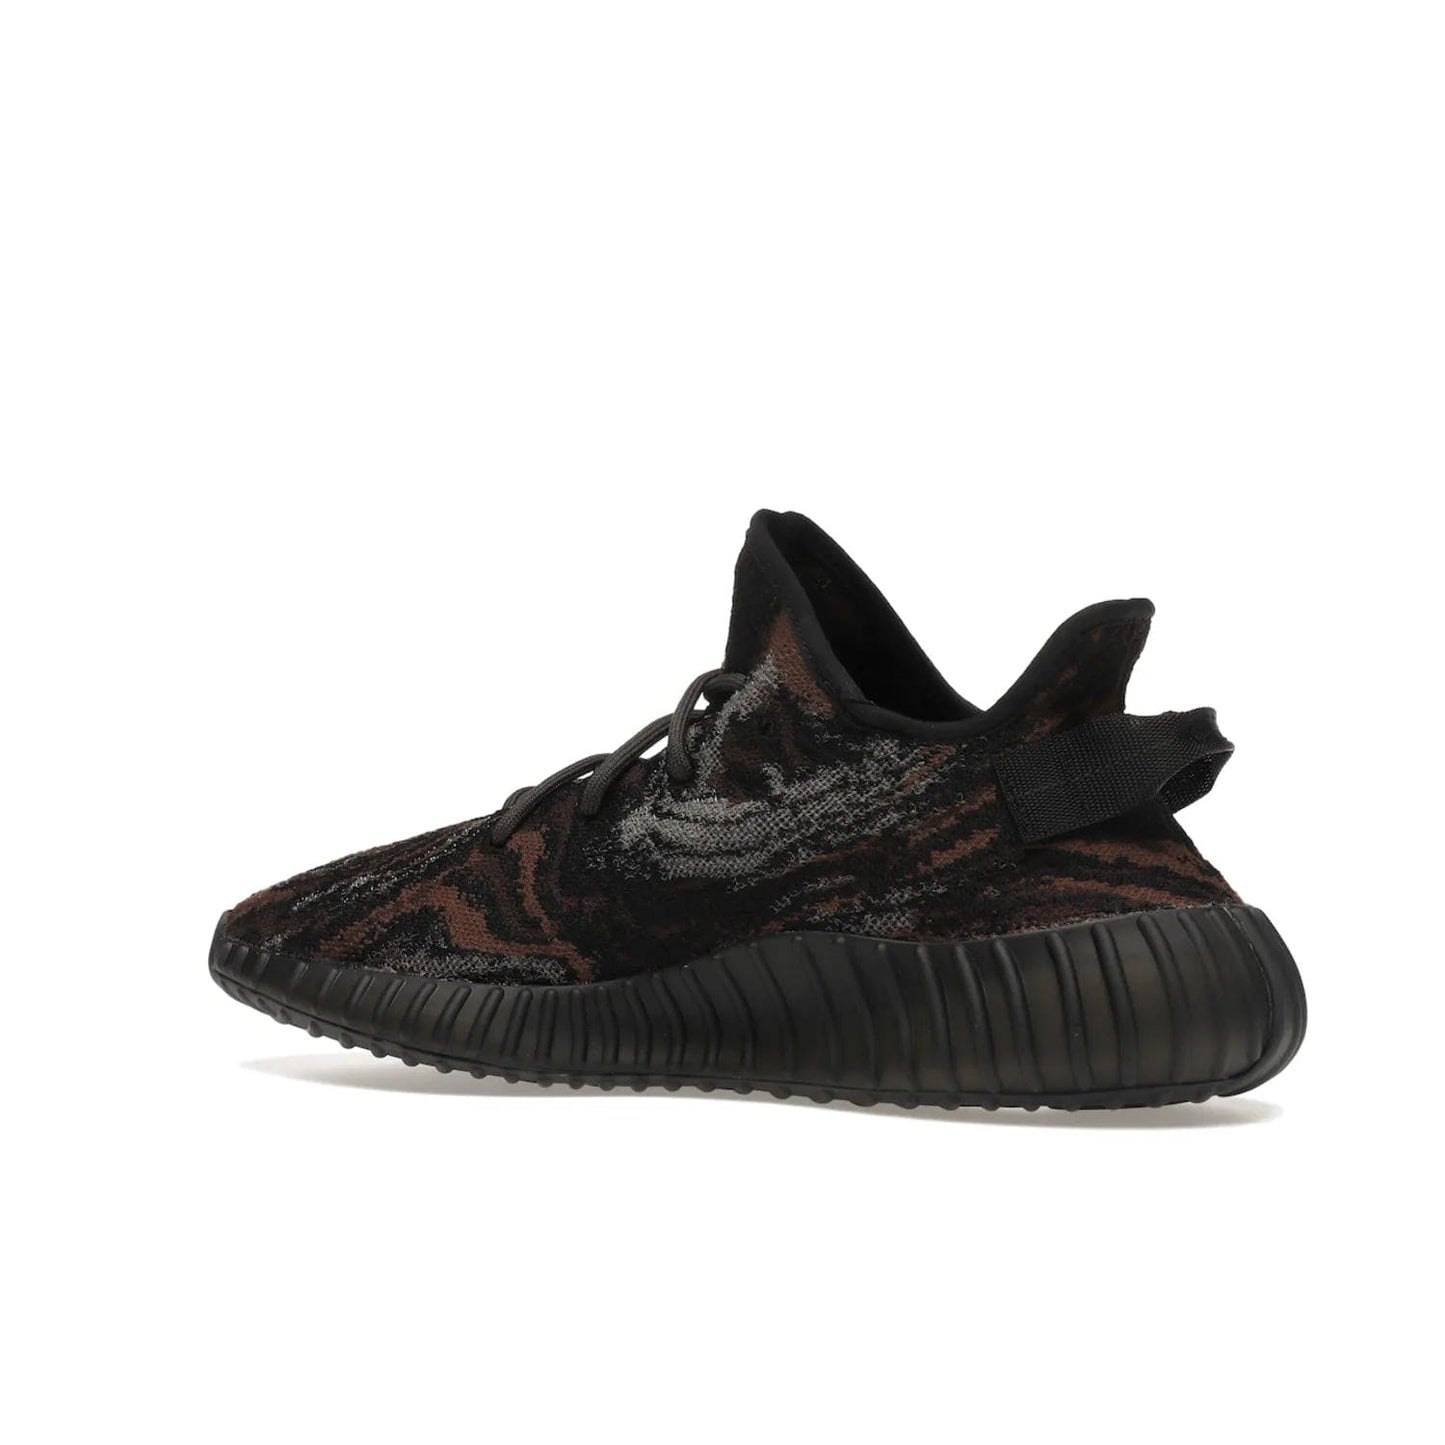 adidas Yeezy Boost 350 V2 MX Rock - Image 22 - Only at www.BallersClubKickz.com - The adidas Yeezy Boost 350 V2 MX Rock features a stylish marbled upper of black, grey, and brown tones. Shop the signature Boost sole, heel tab, and mesh side stripe now, available December of 2021.